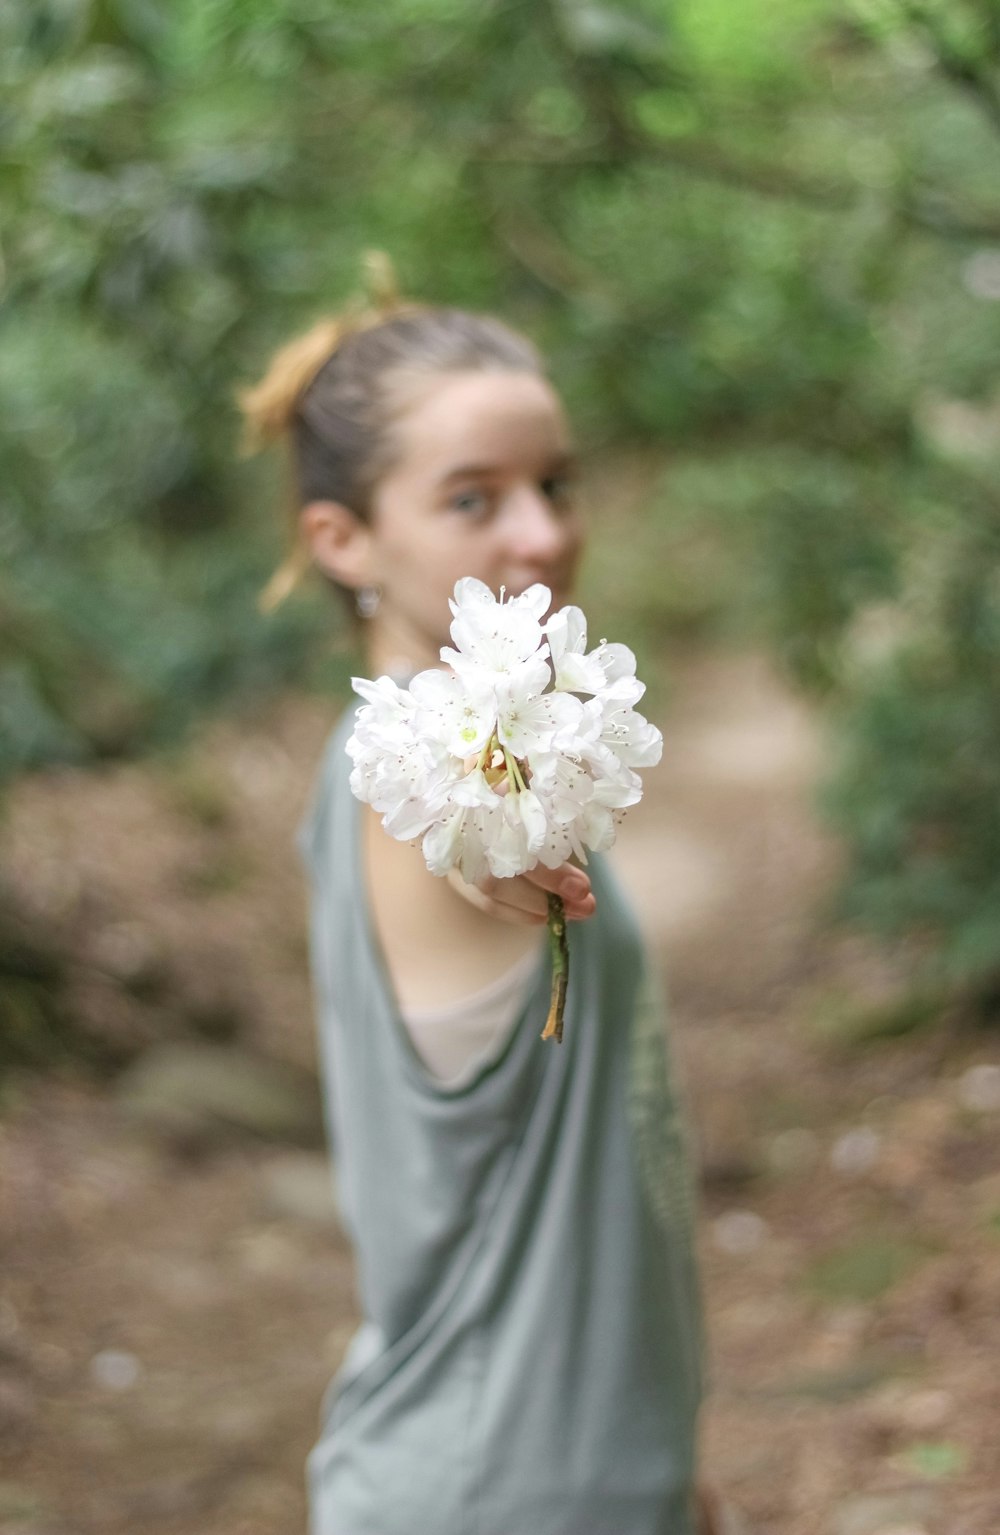 a woman holding a white flower in her hand